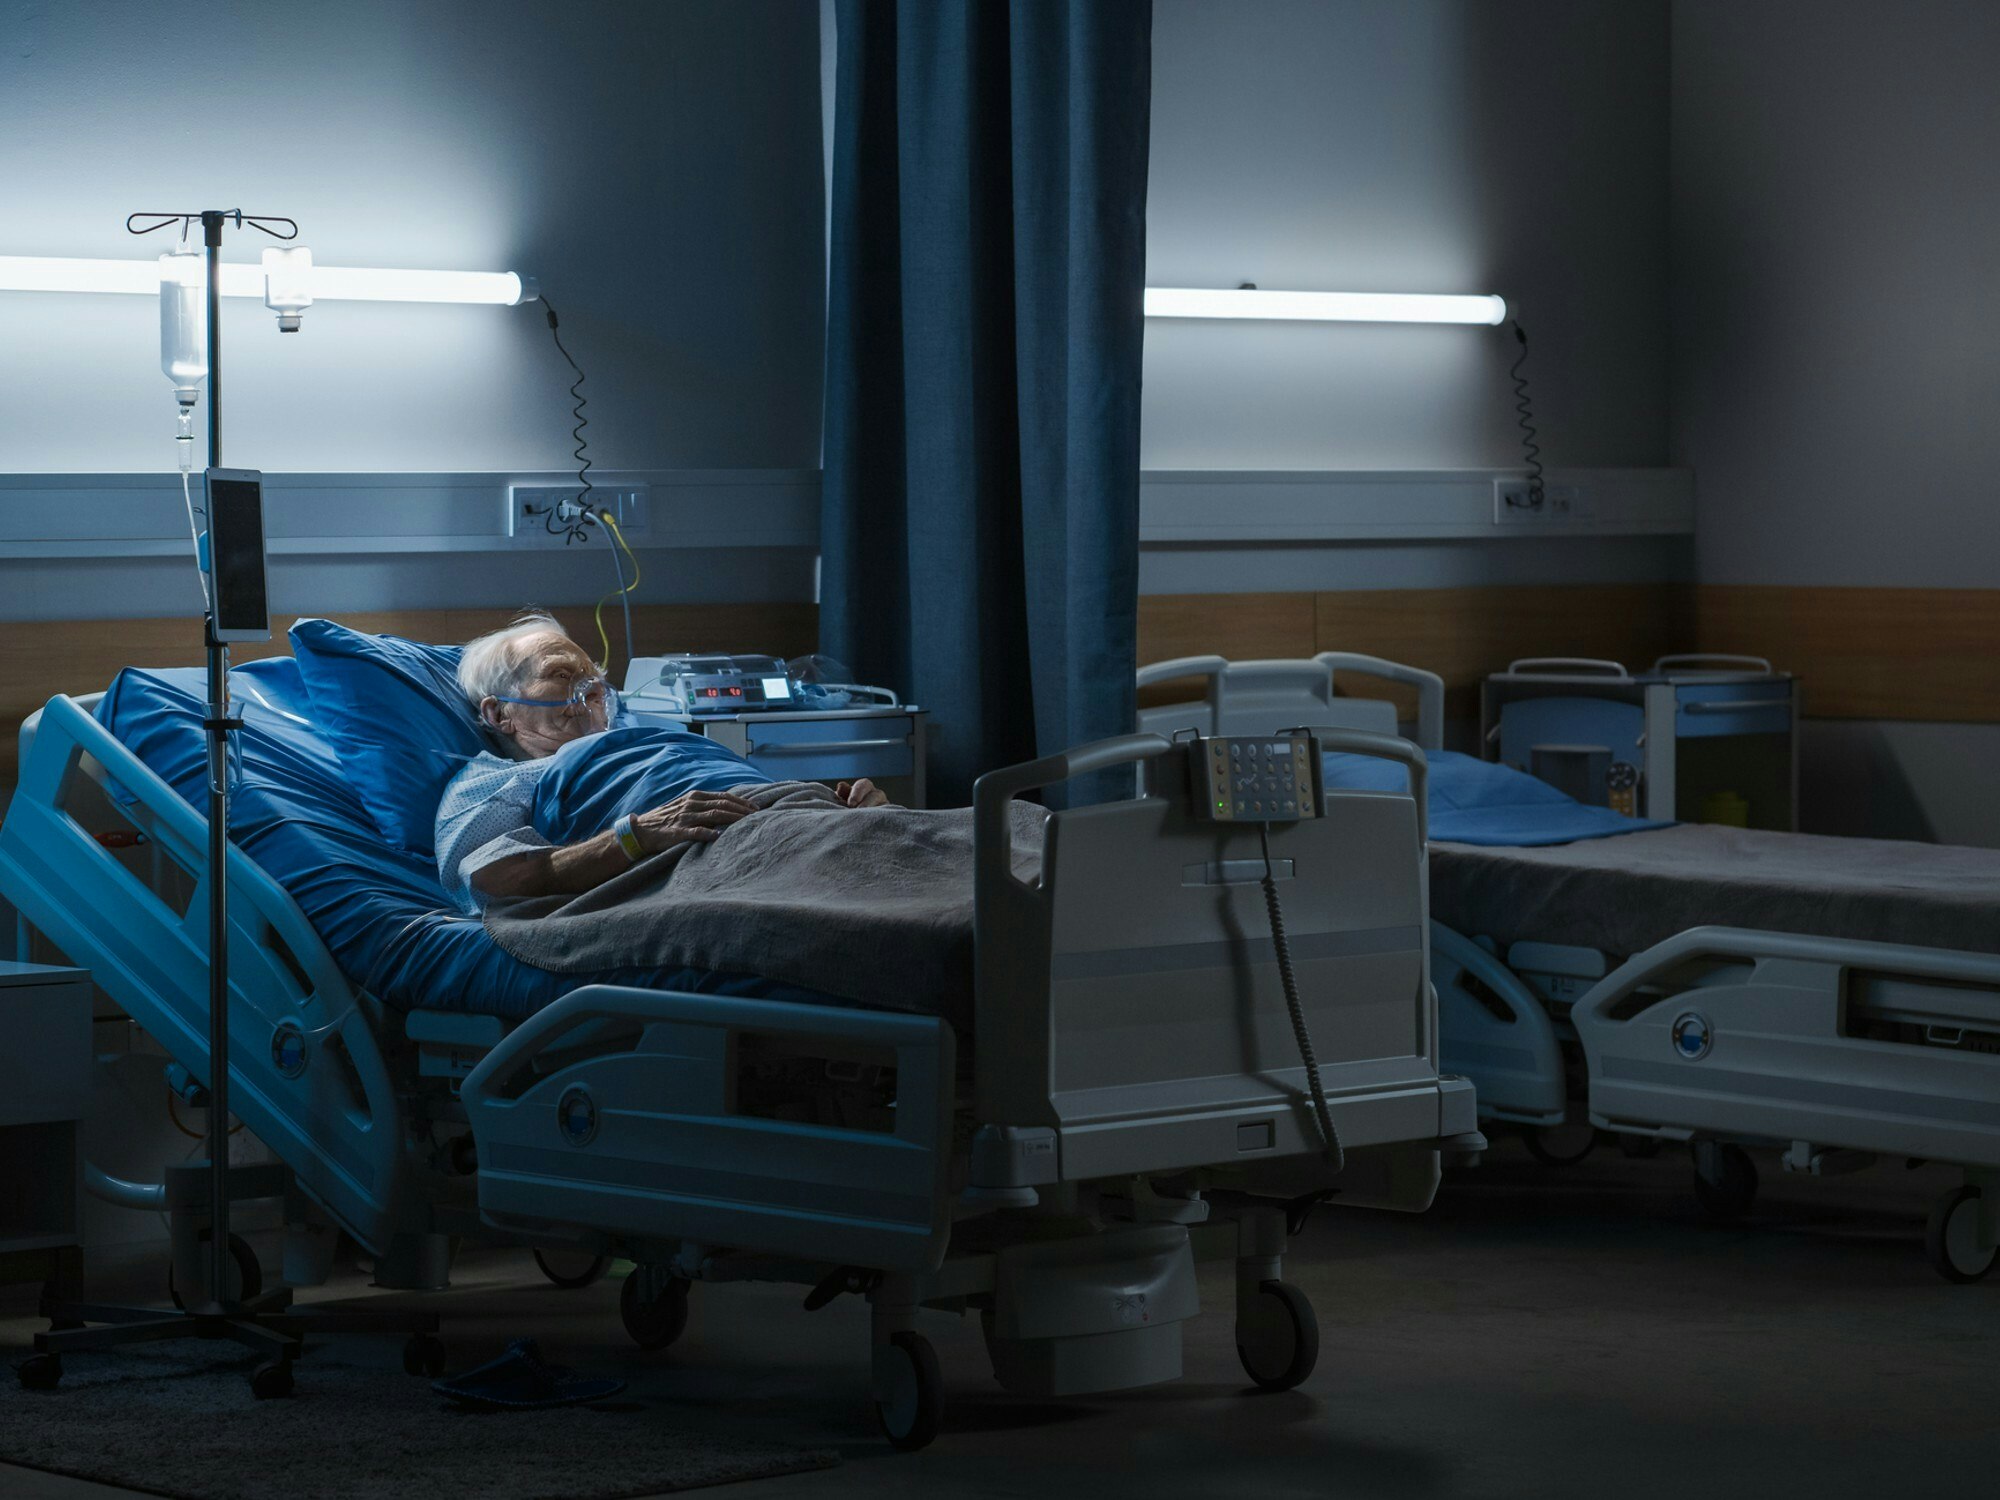 <p>COVID-19 infection and deaths are still high in Australia, but there has not been a focus on supporting people with disability through the remainder of the pandemic. [Source: iStock]</p>
